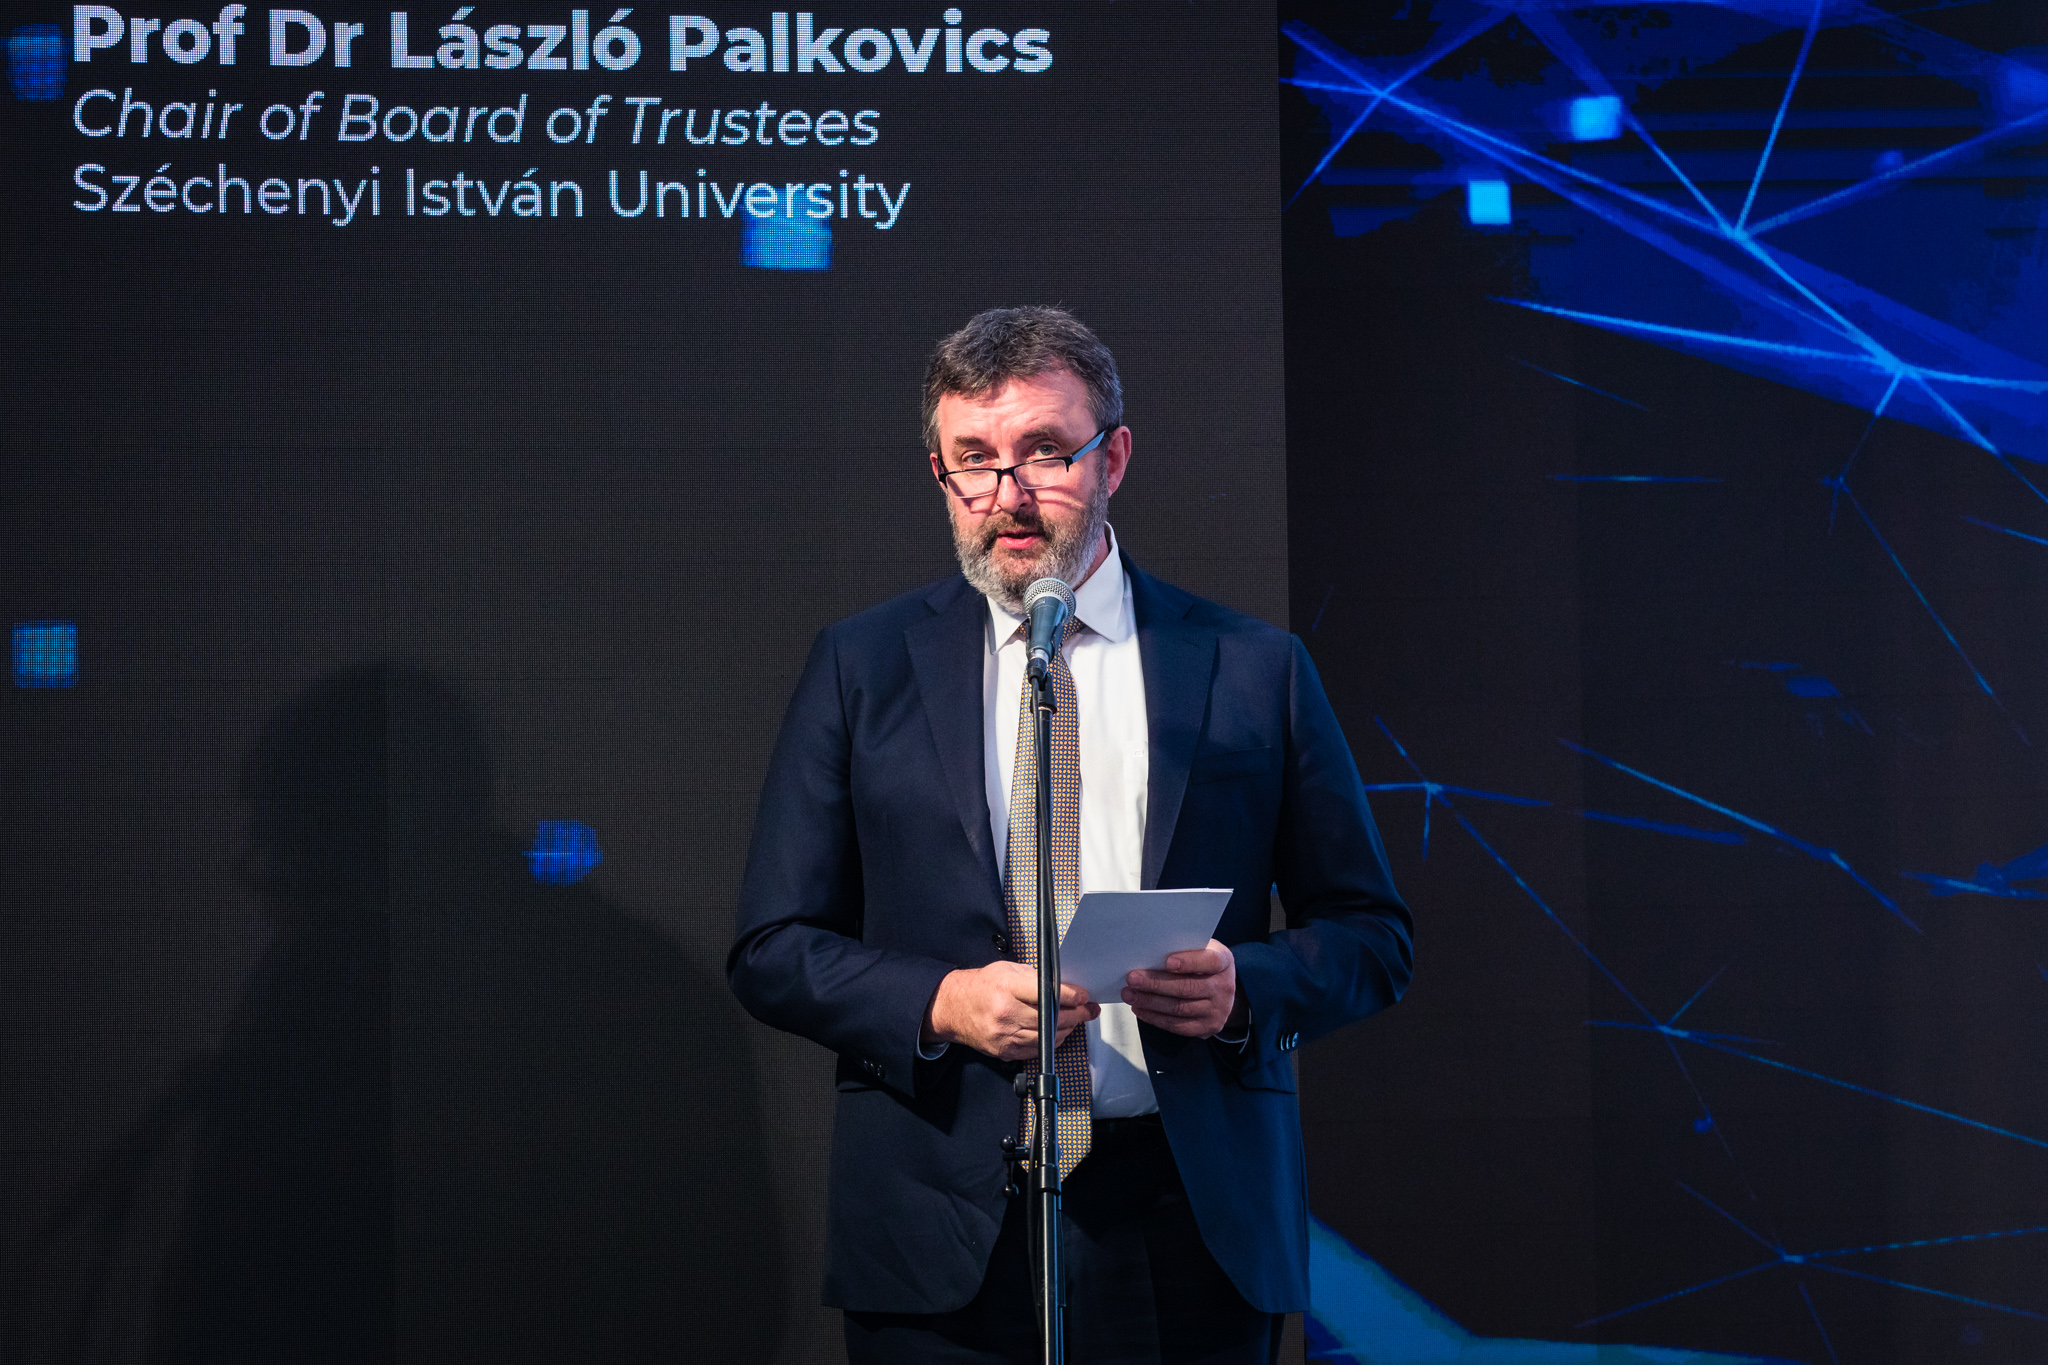 Prof. Dr. László Palkovics, Chairman of the Board of Trustees of the Széchenyi István University Foundation, said that Széchenyi István University has been characterized by its receptiveness to innovation for decades